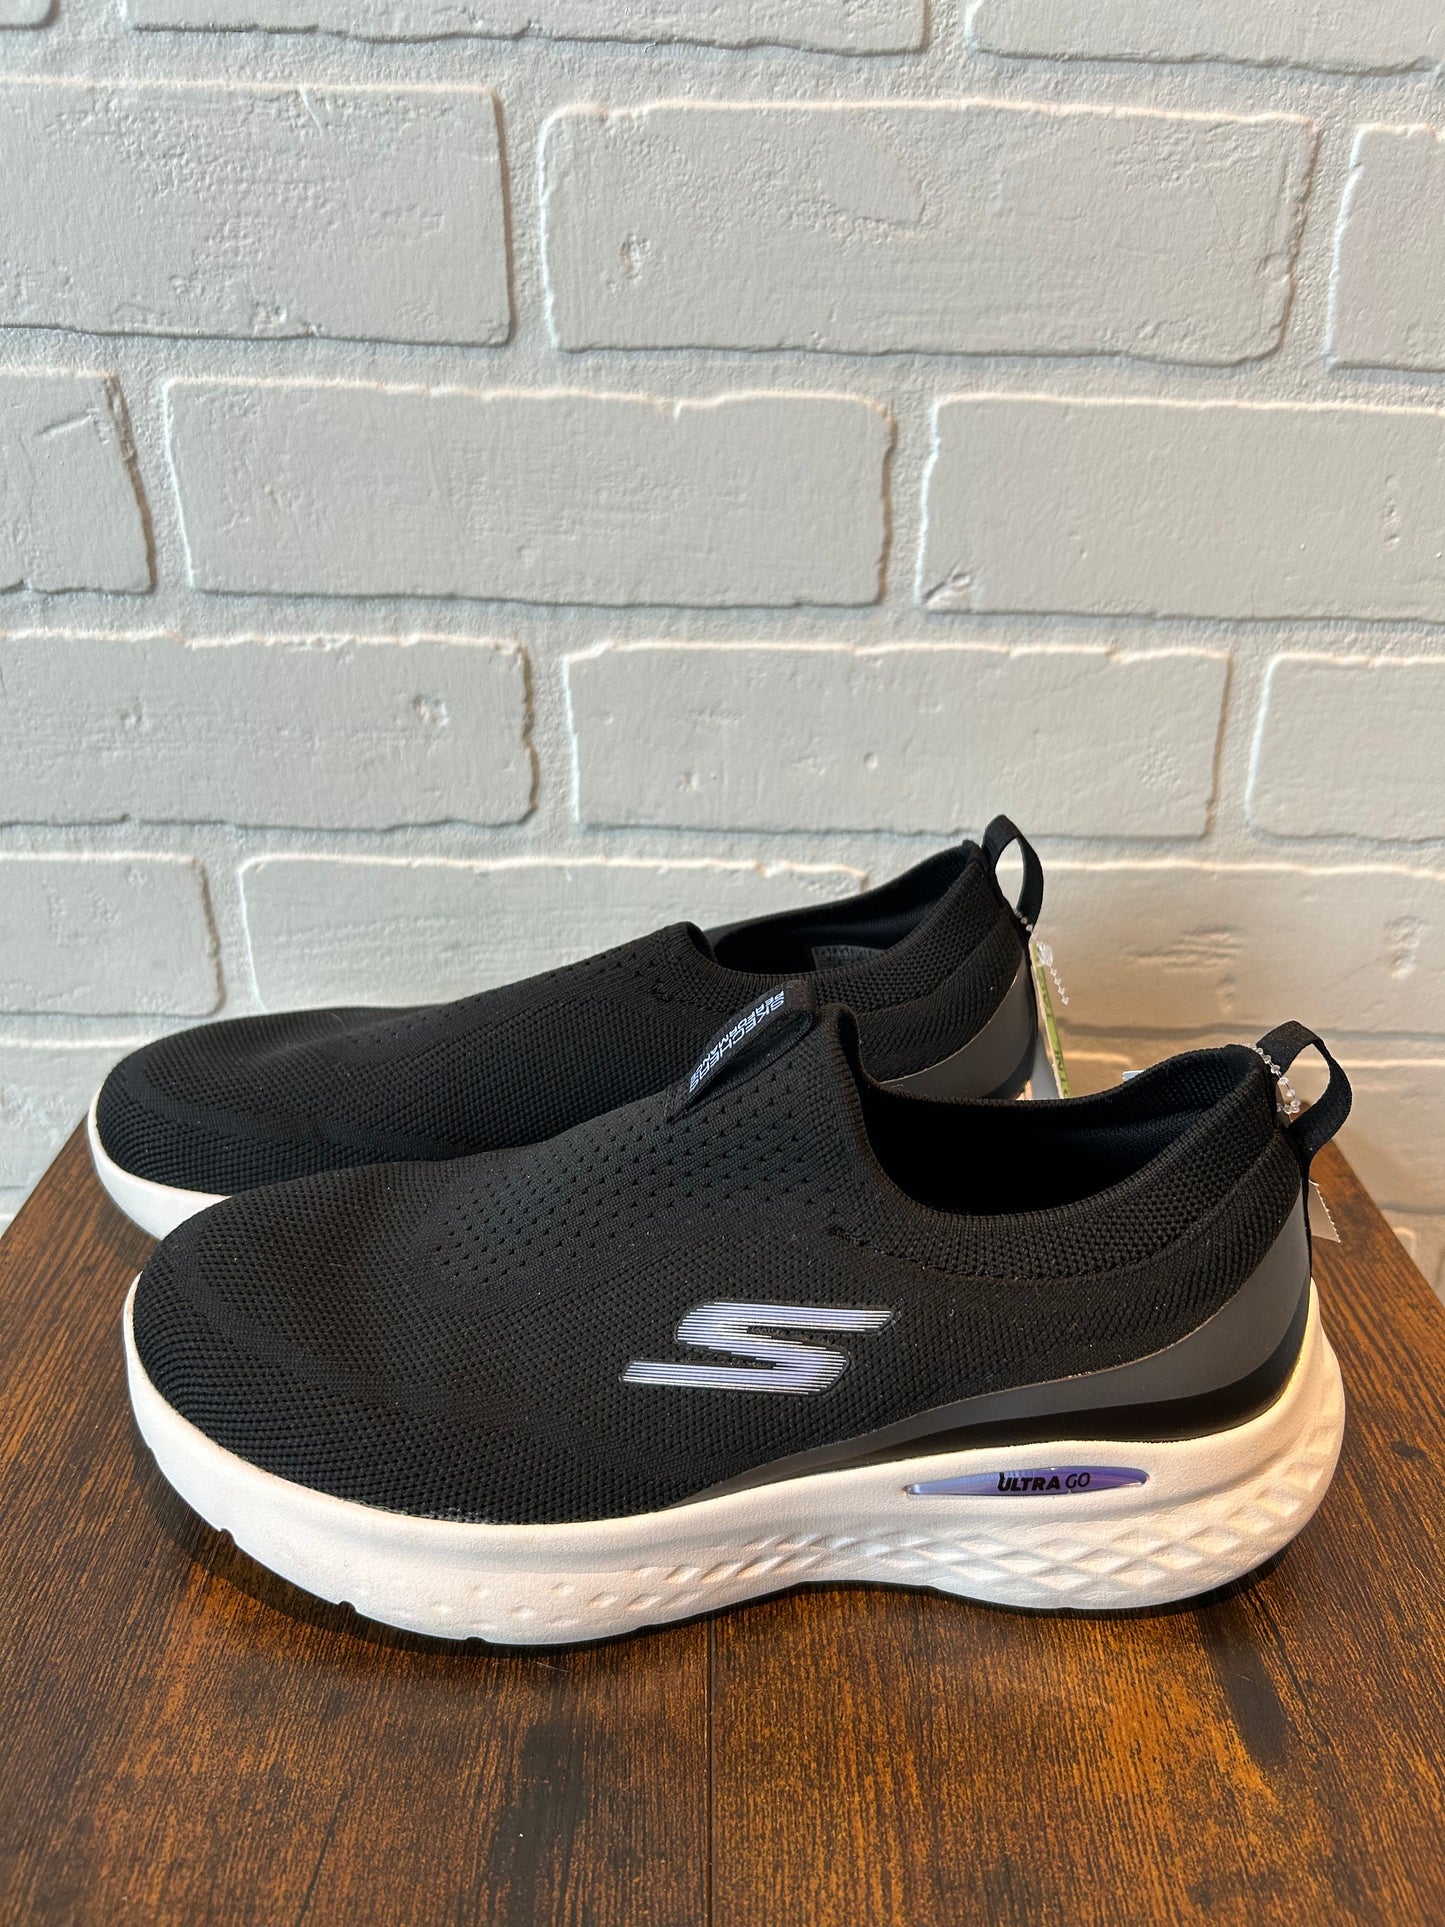 Shoes Sneakers By Skechers  Size: 7